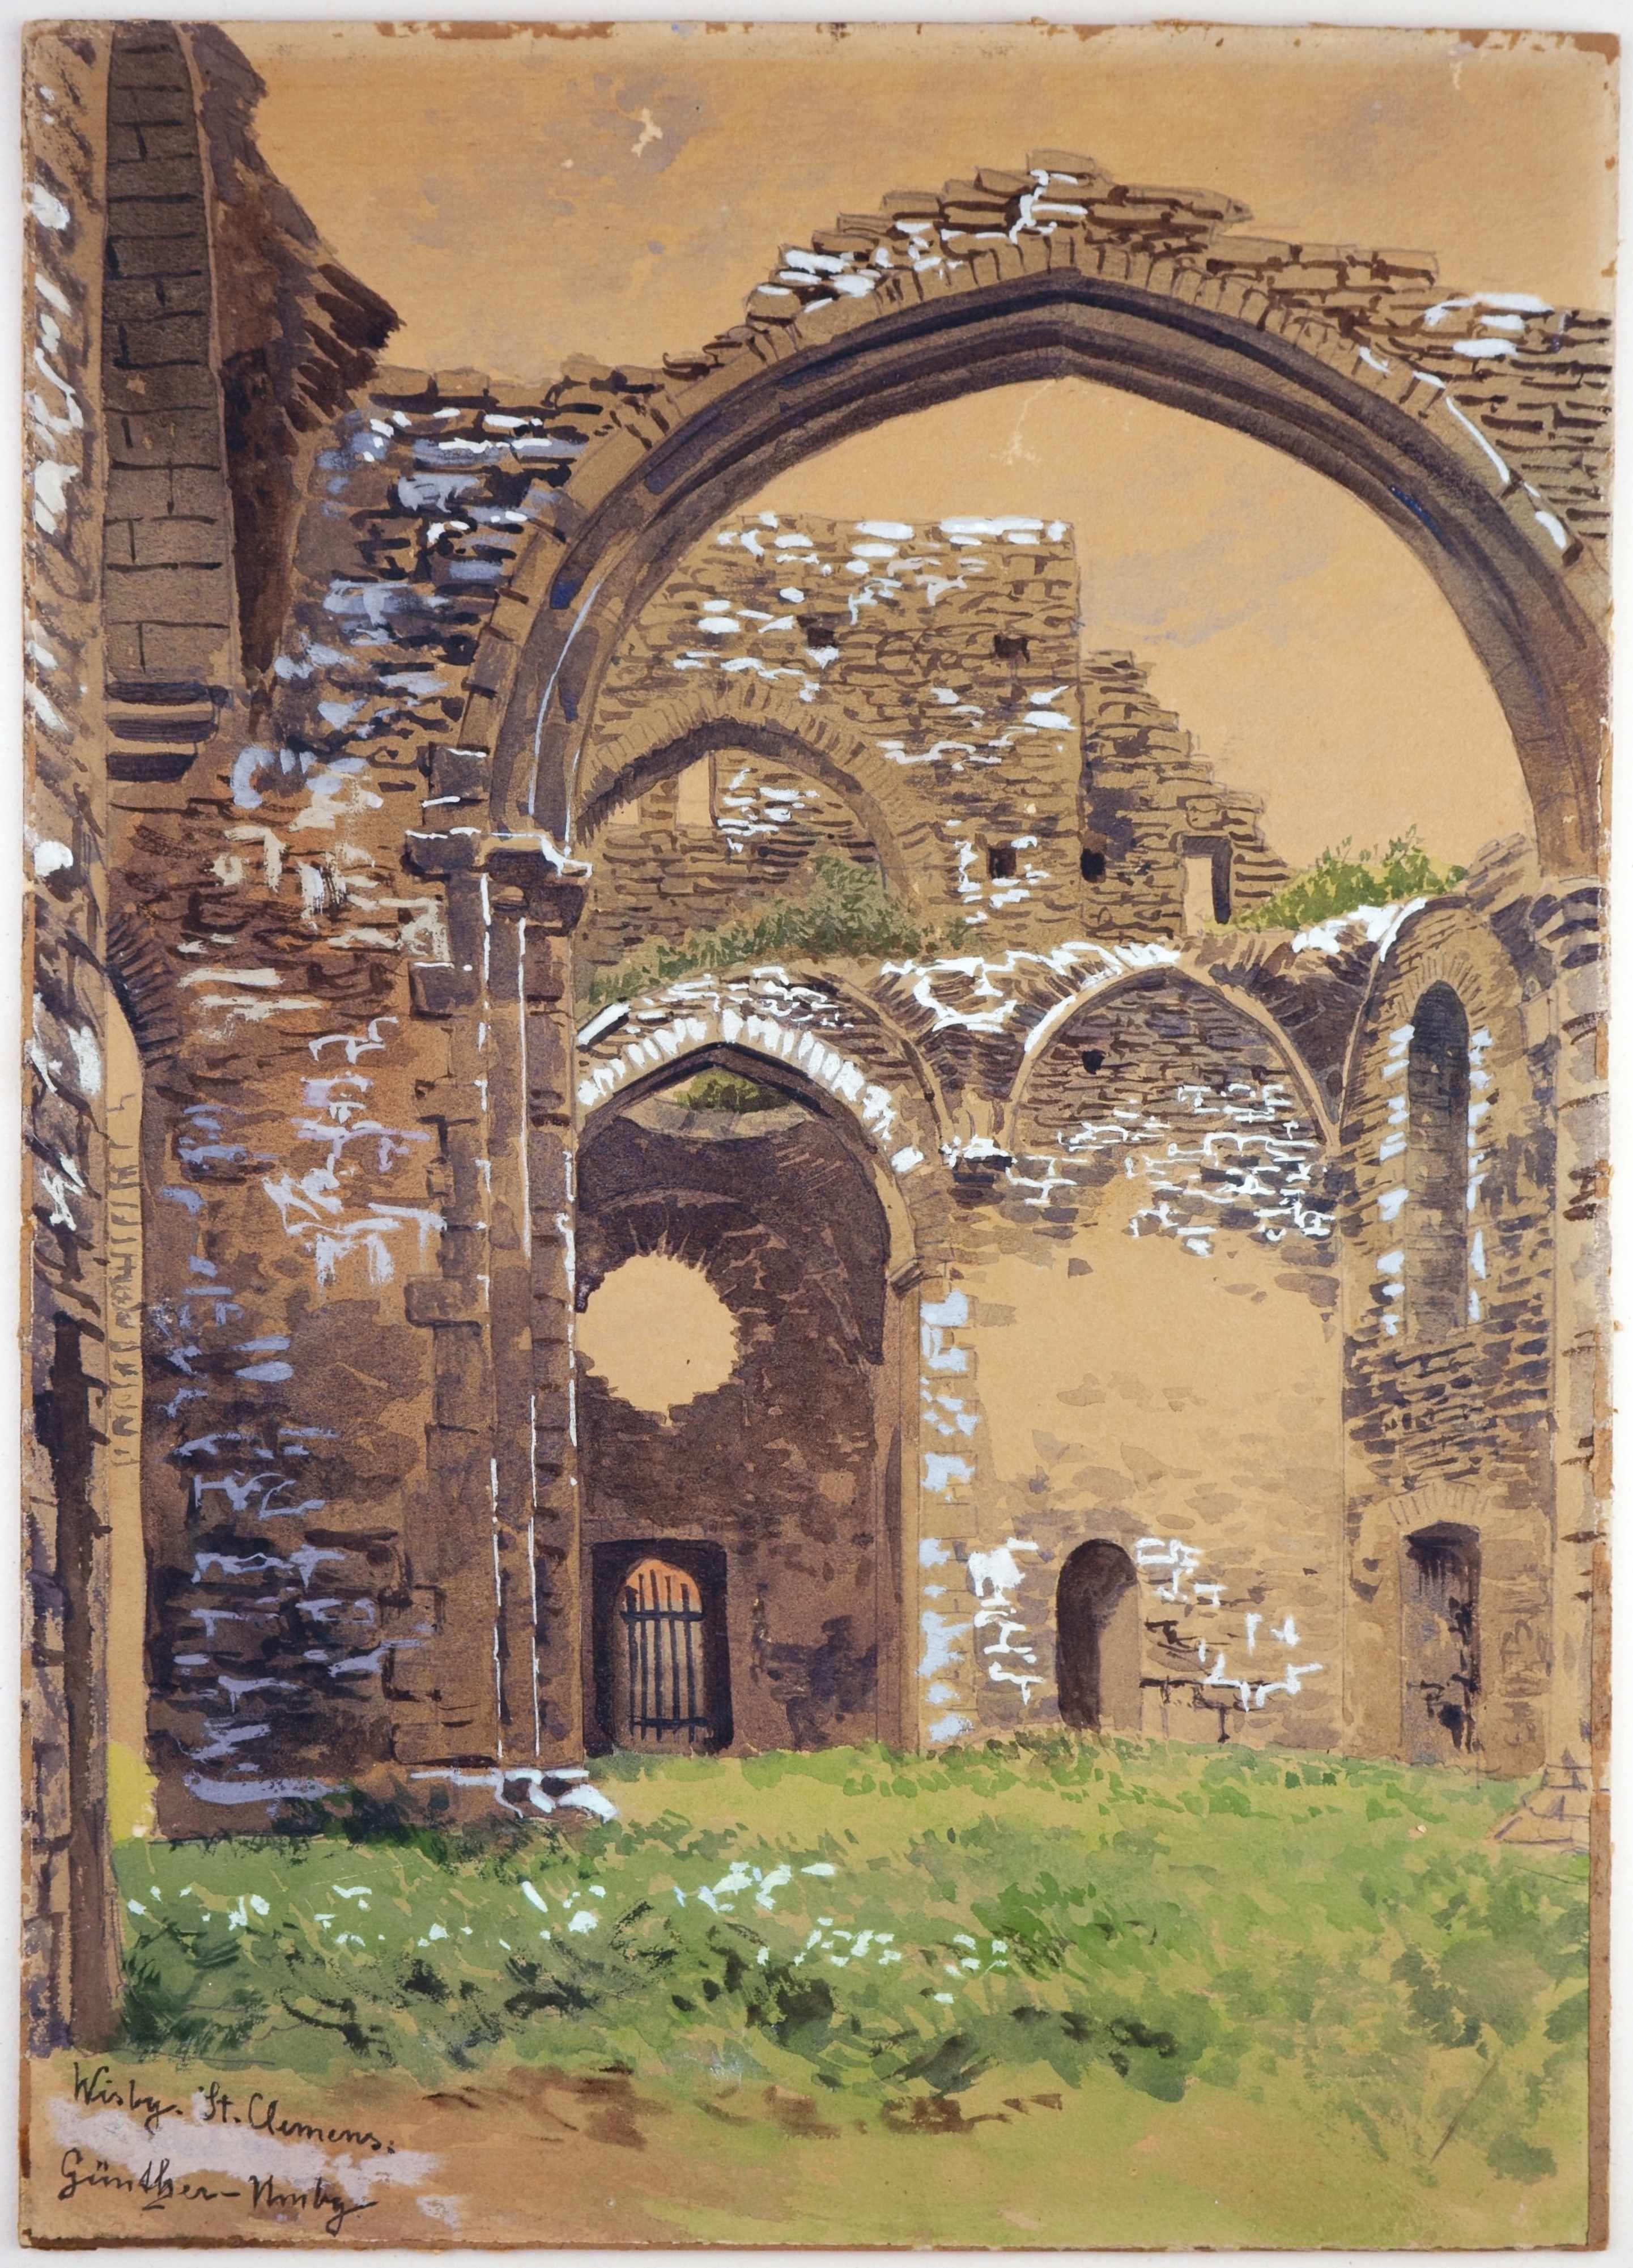 Otto Günther-Naumburg Landscape Art - The Ruins of St. Clement's Church in Visby, Sweden / - Real romanticism -